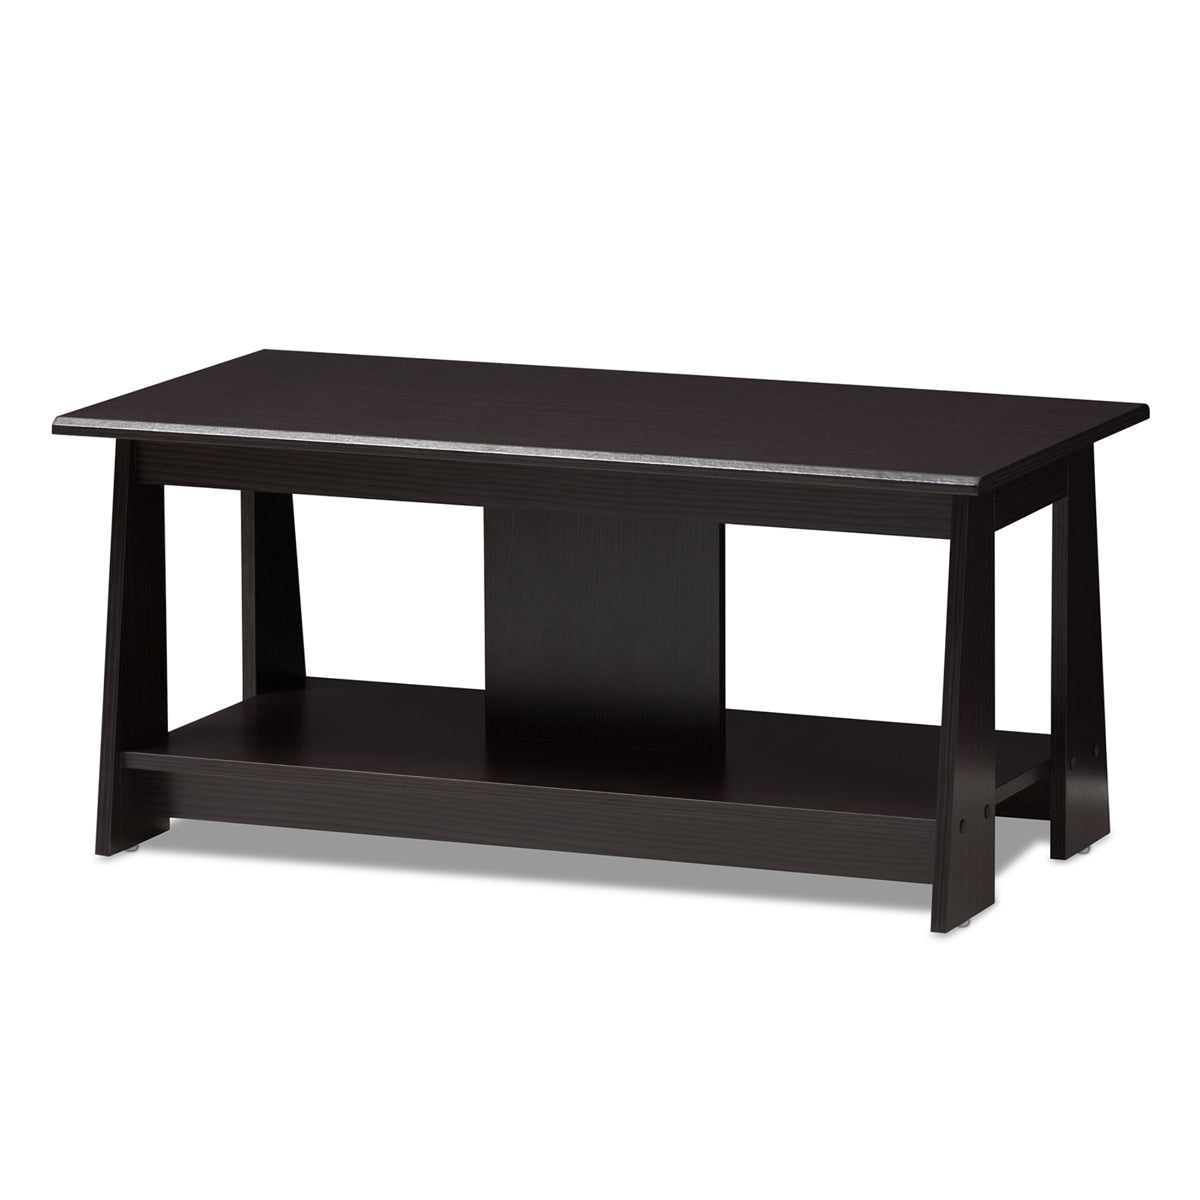 Baxton Studio Fionan Modern and Contemporary Wenge Brown Finished Coffee Table Baxton Studio-coffee tables-Minimal And Modern - 1